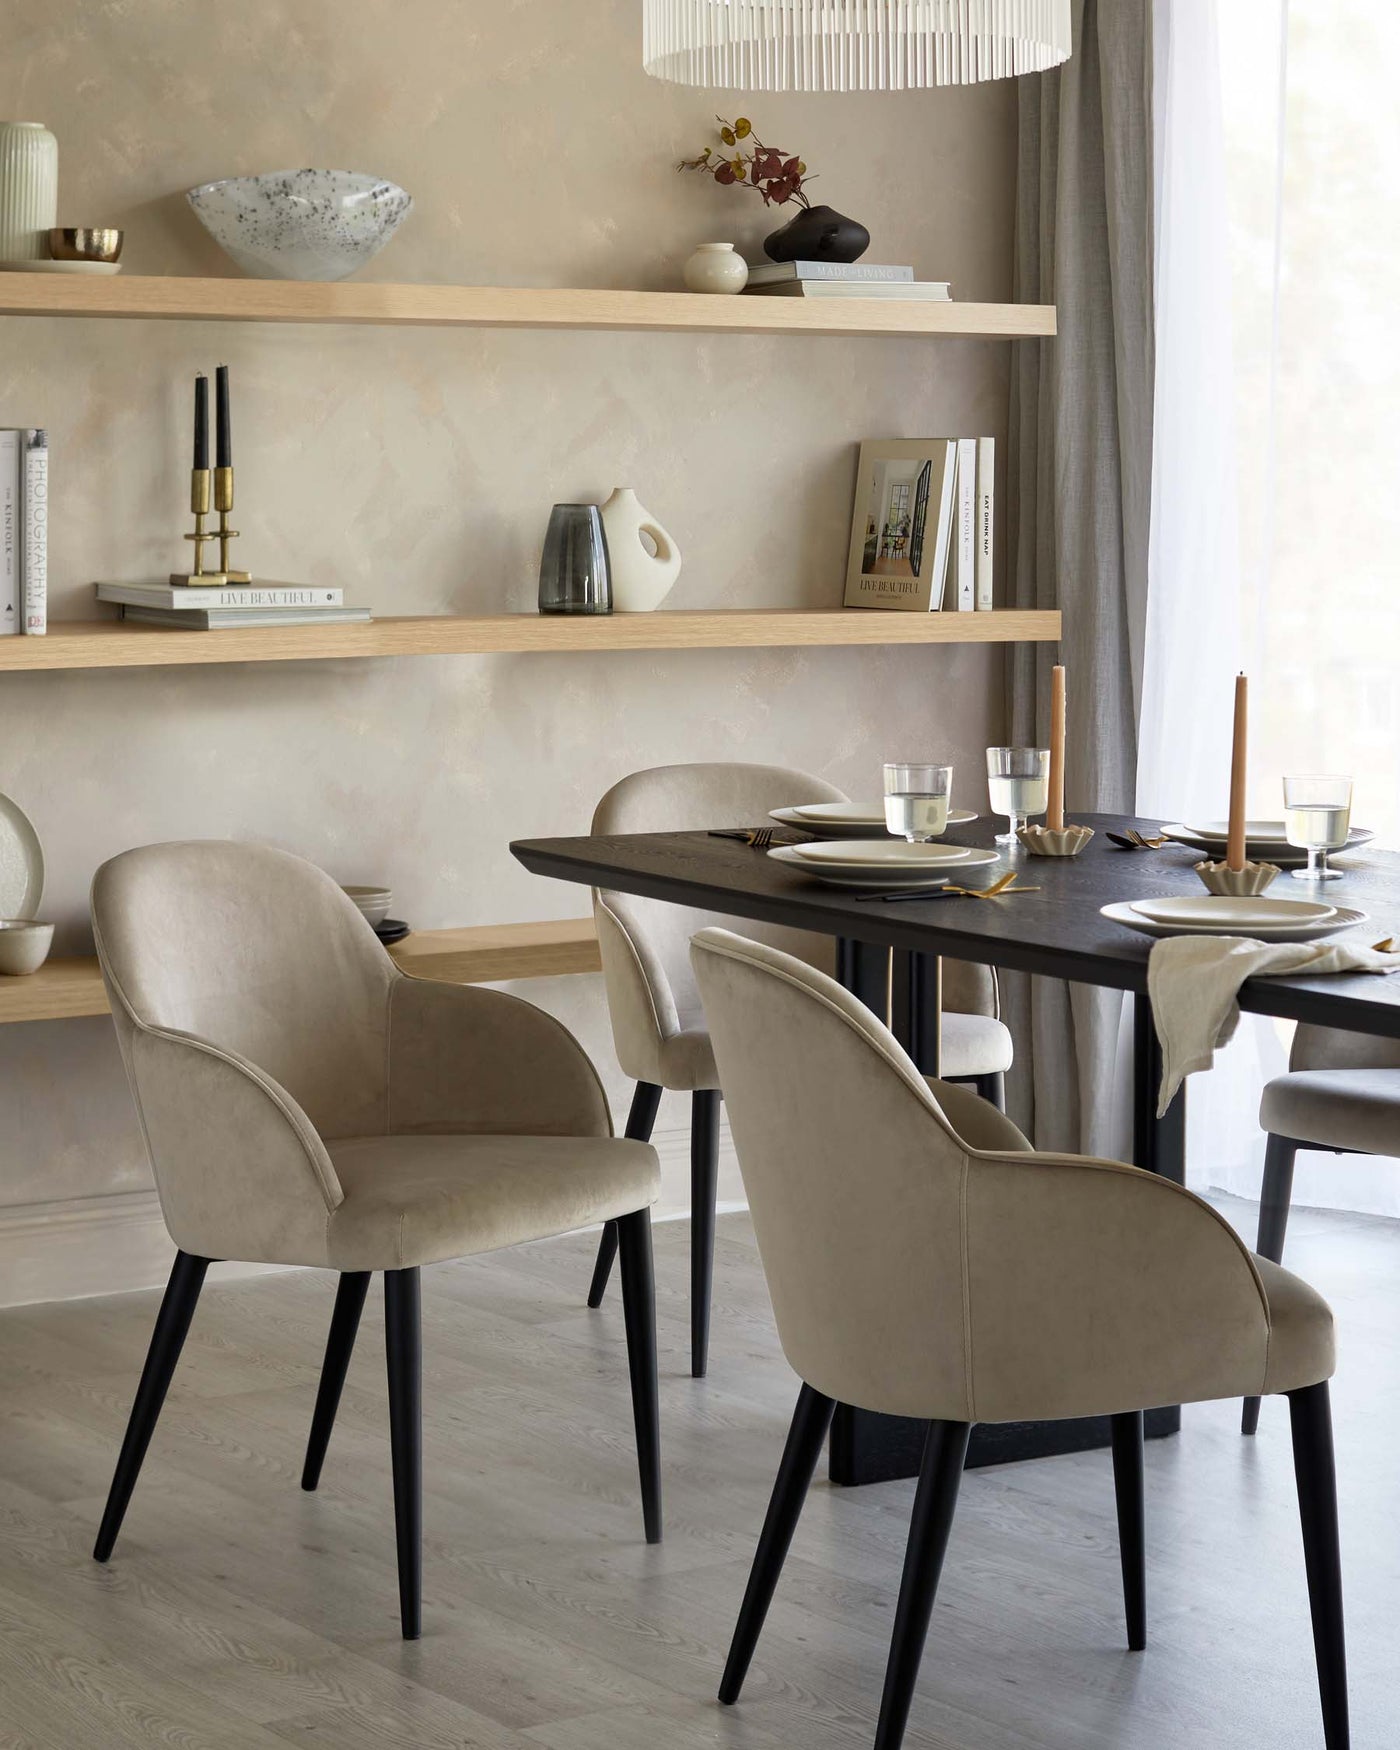 A modern dining area featuring an oval-shaped dark wood table with a matte finish and black tapered legs, surrounded by four elegant upholstered chairs with a plush beige fabric. The chairs showcase a curvaceous silhouette with soft lines and black tapered legs to match the table, offering a sophisticated and cohesive design. On the wall, two natural wood floating shelves are placed, storing decorative items and books, contributing to the minimalistic yet warm ambiance of the space.